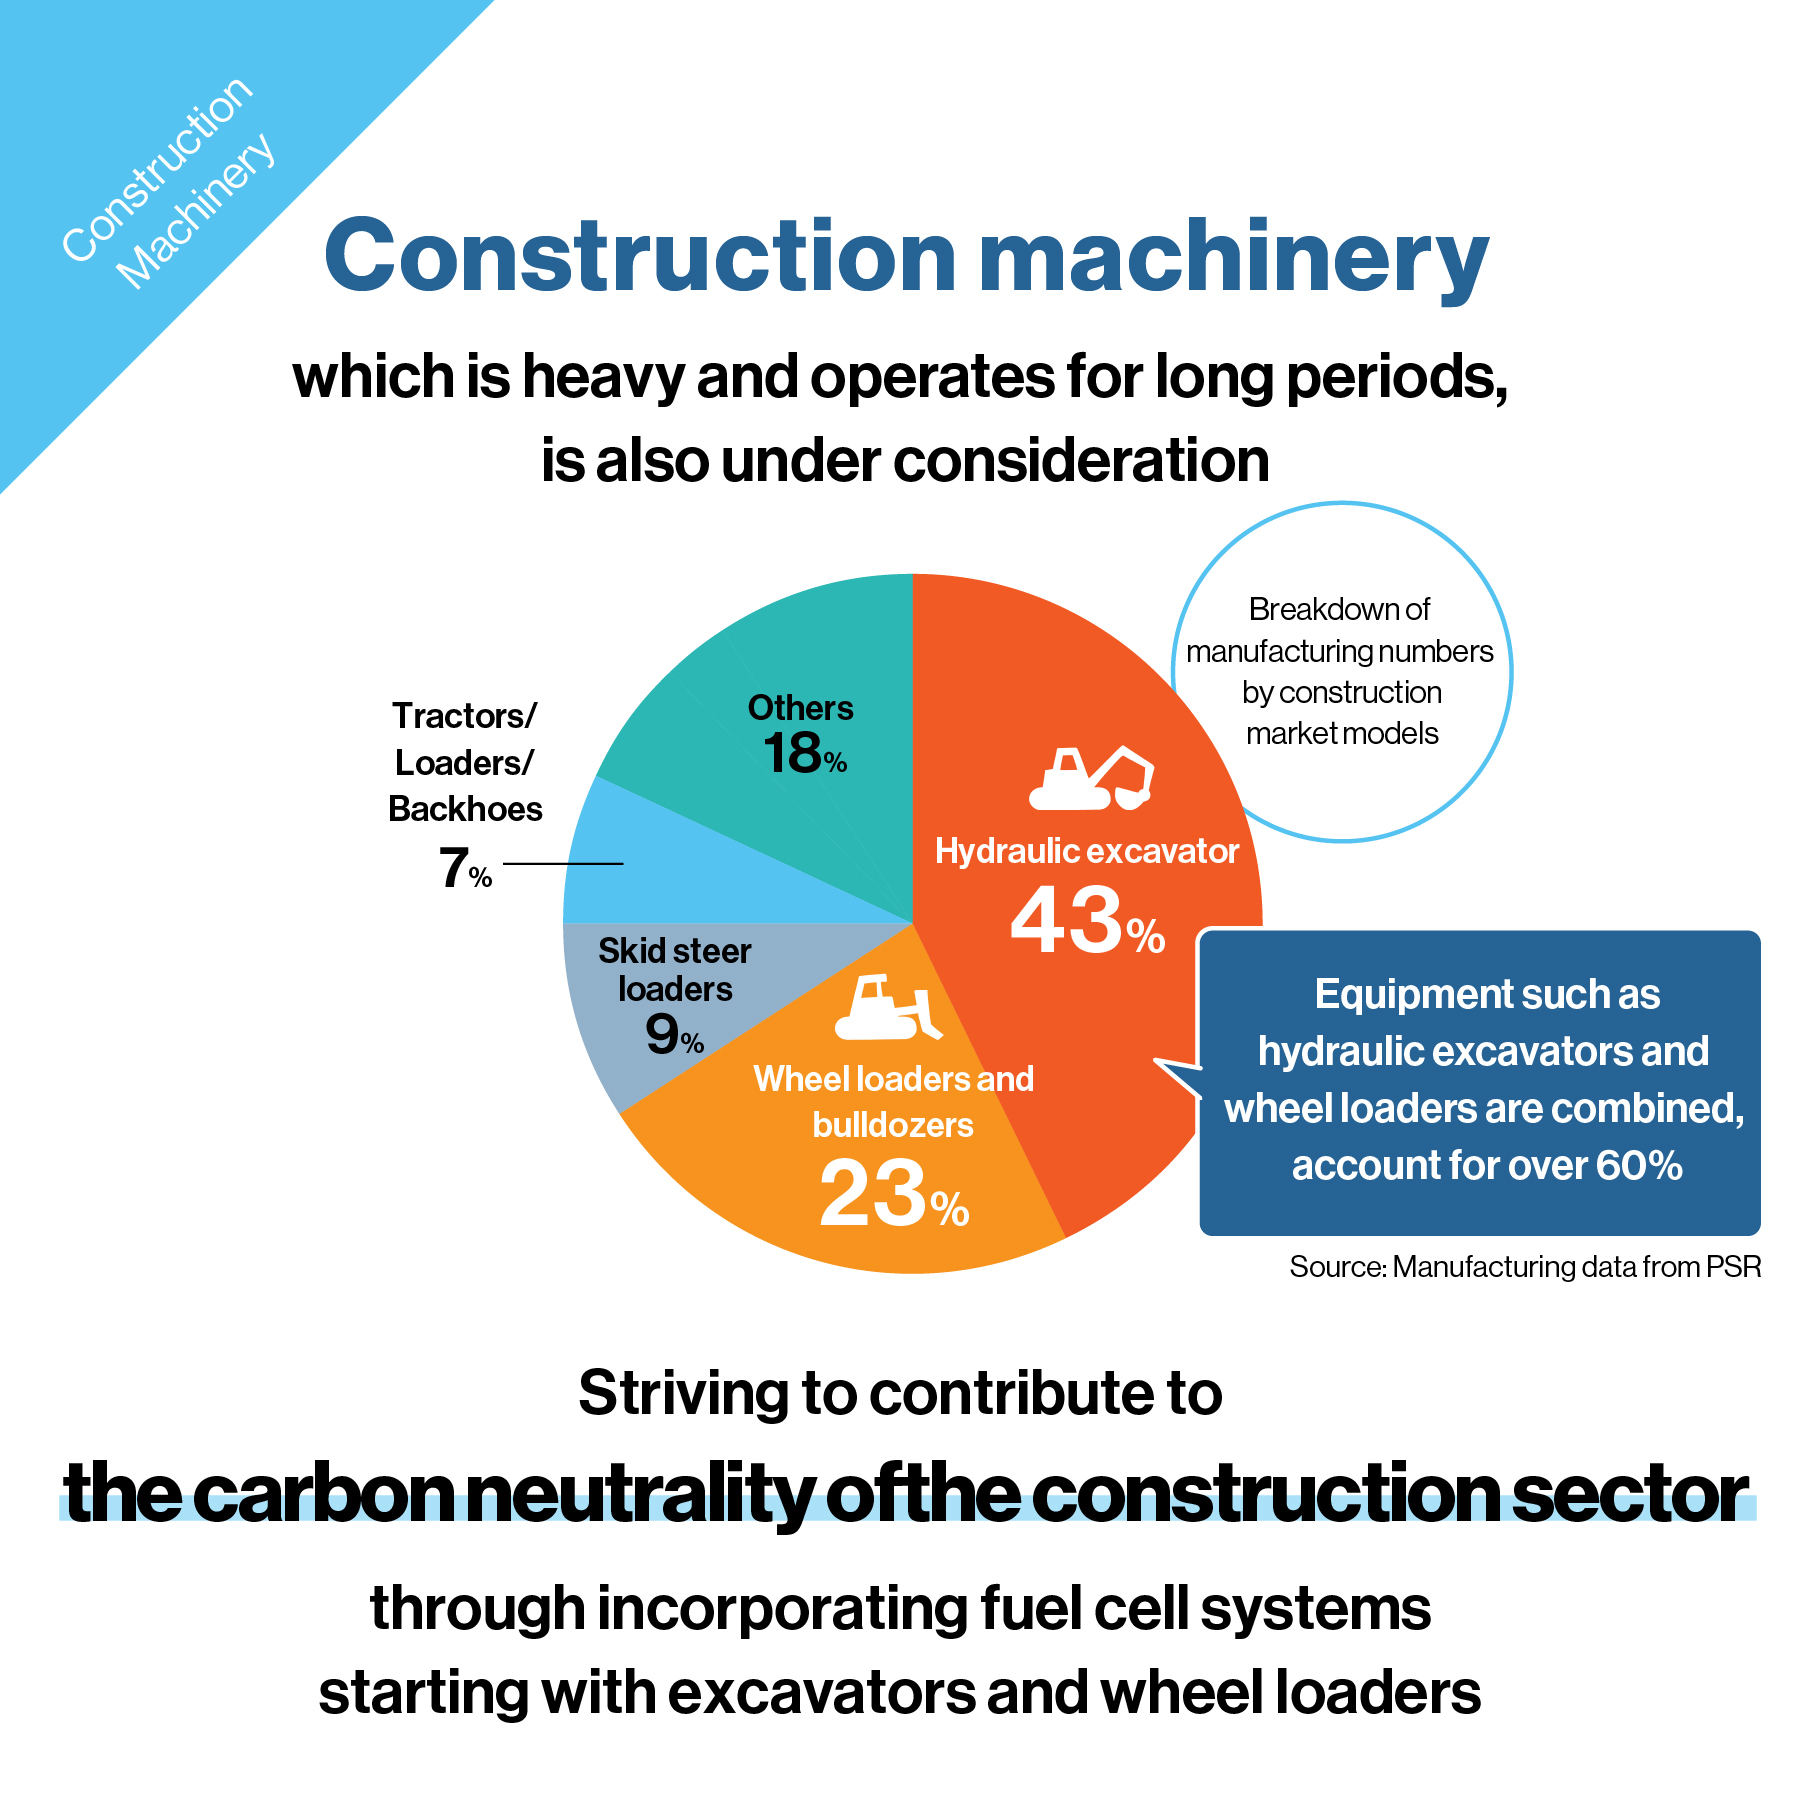 Incorporating fuel cell systems in construction machinery, contributing to the carbon neutrality of the construction sector